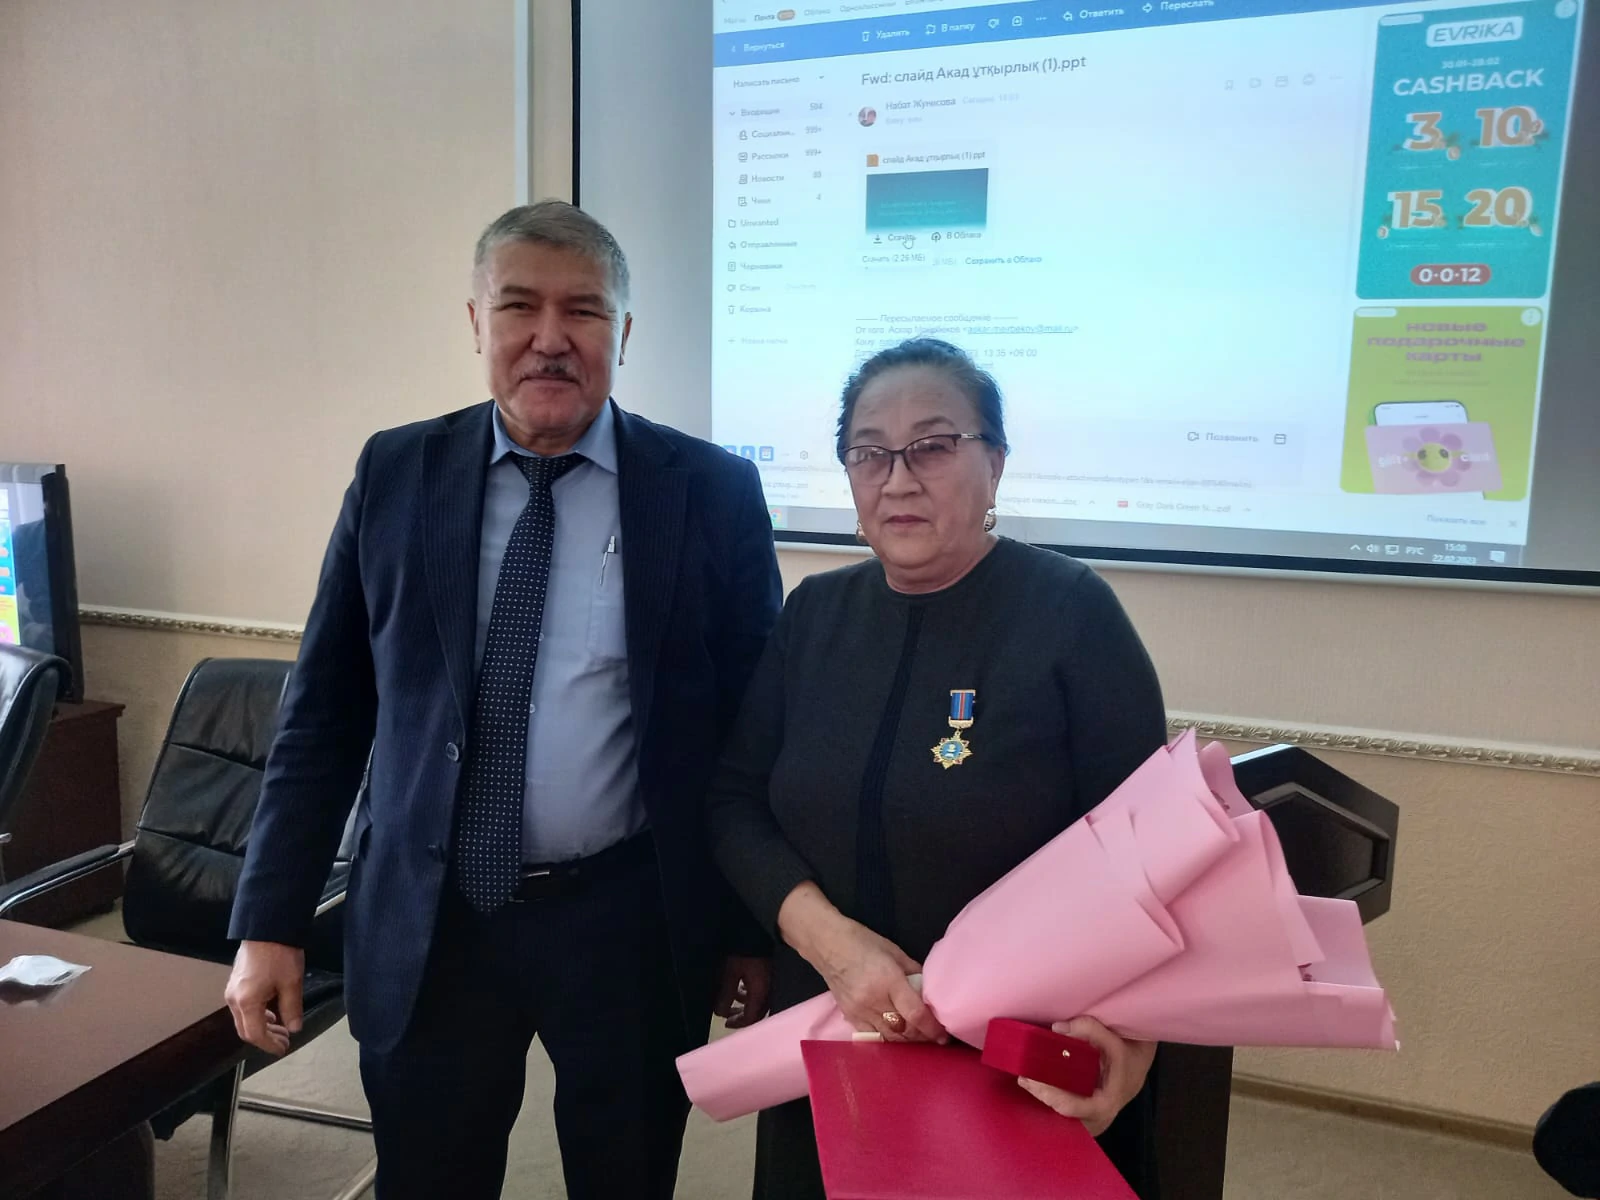 The Order of “Y.Altynsarin” was awarded the senior lecturer of the Department of Languages and Literature